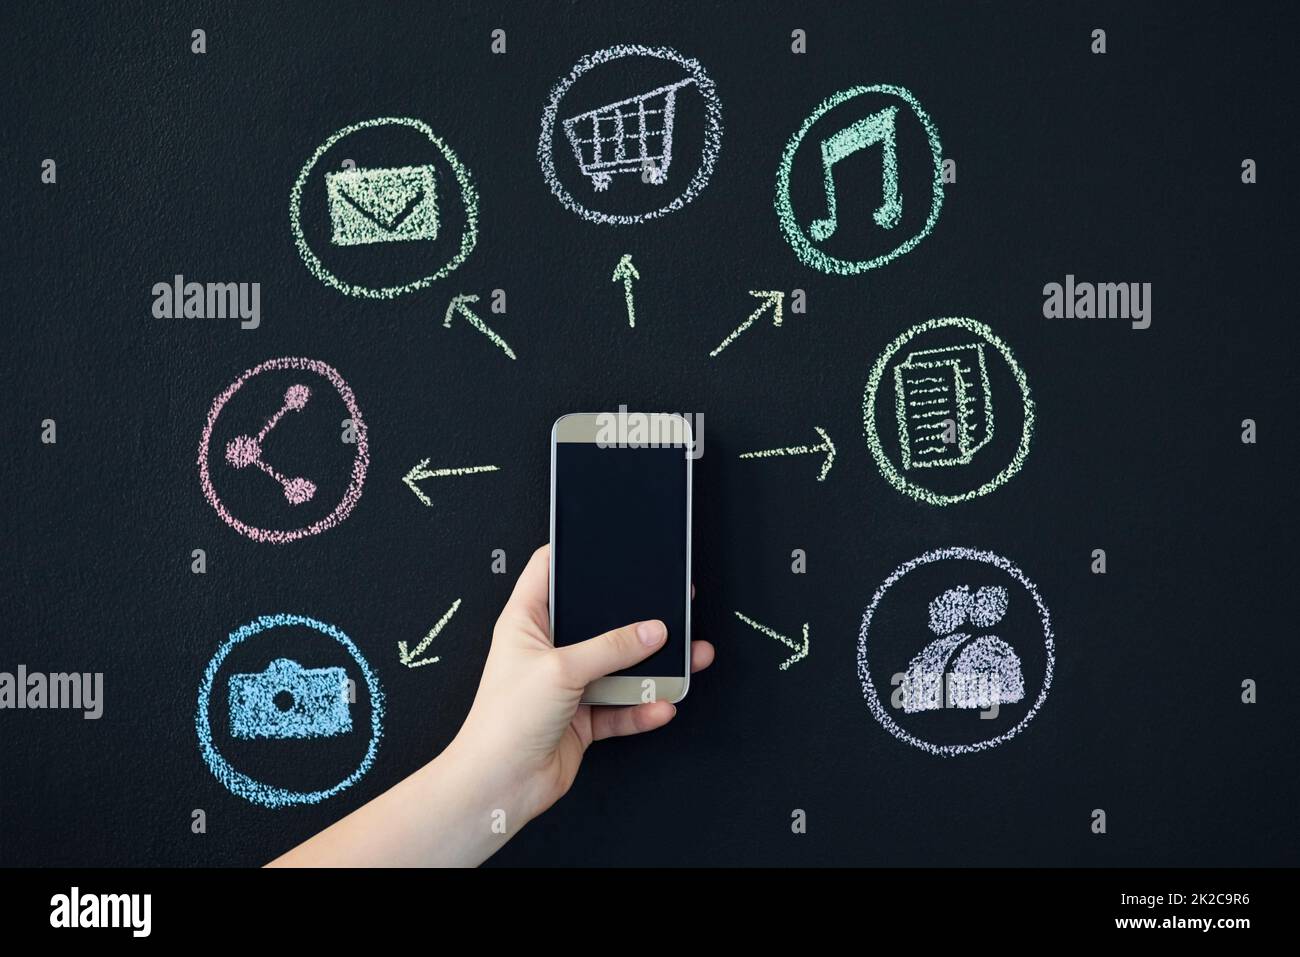 So many features to the phone. Shot of a person holding a cellphone surrounded by icons. Stock Photo